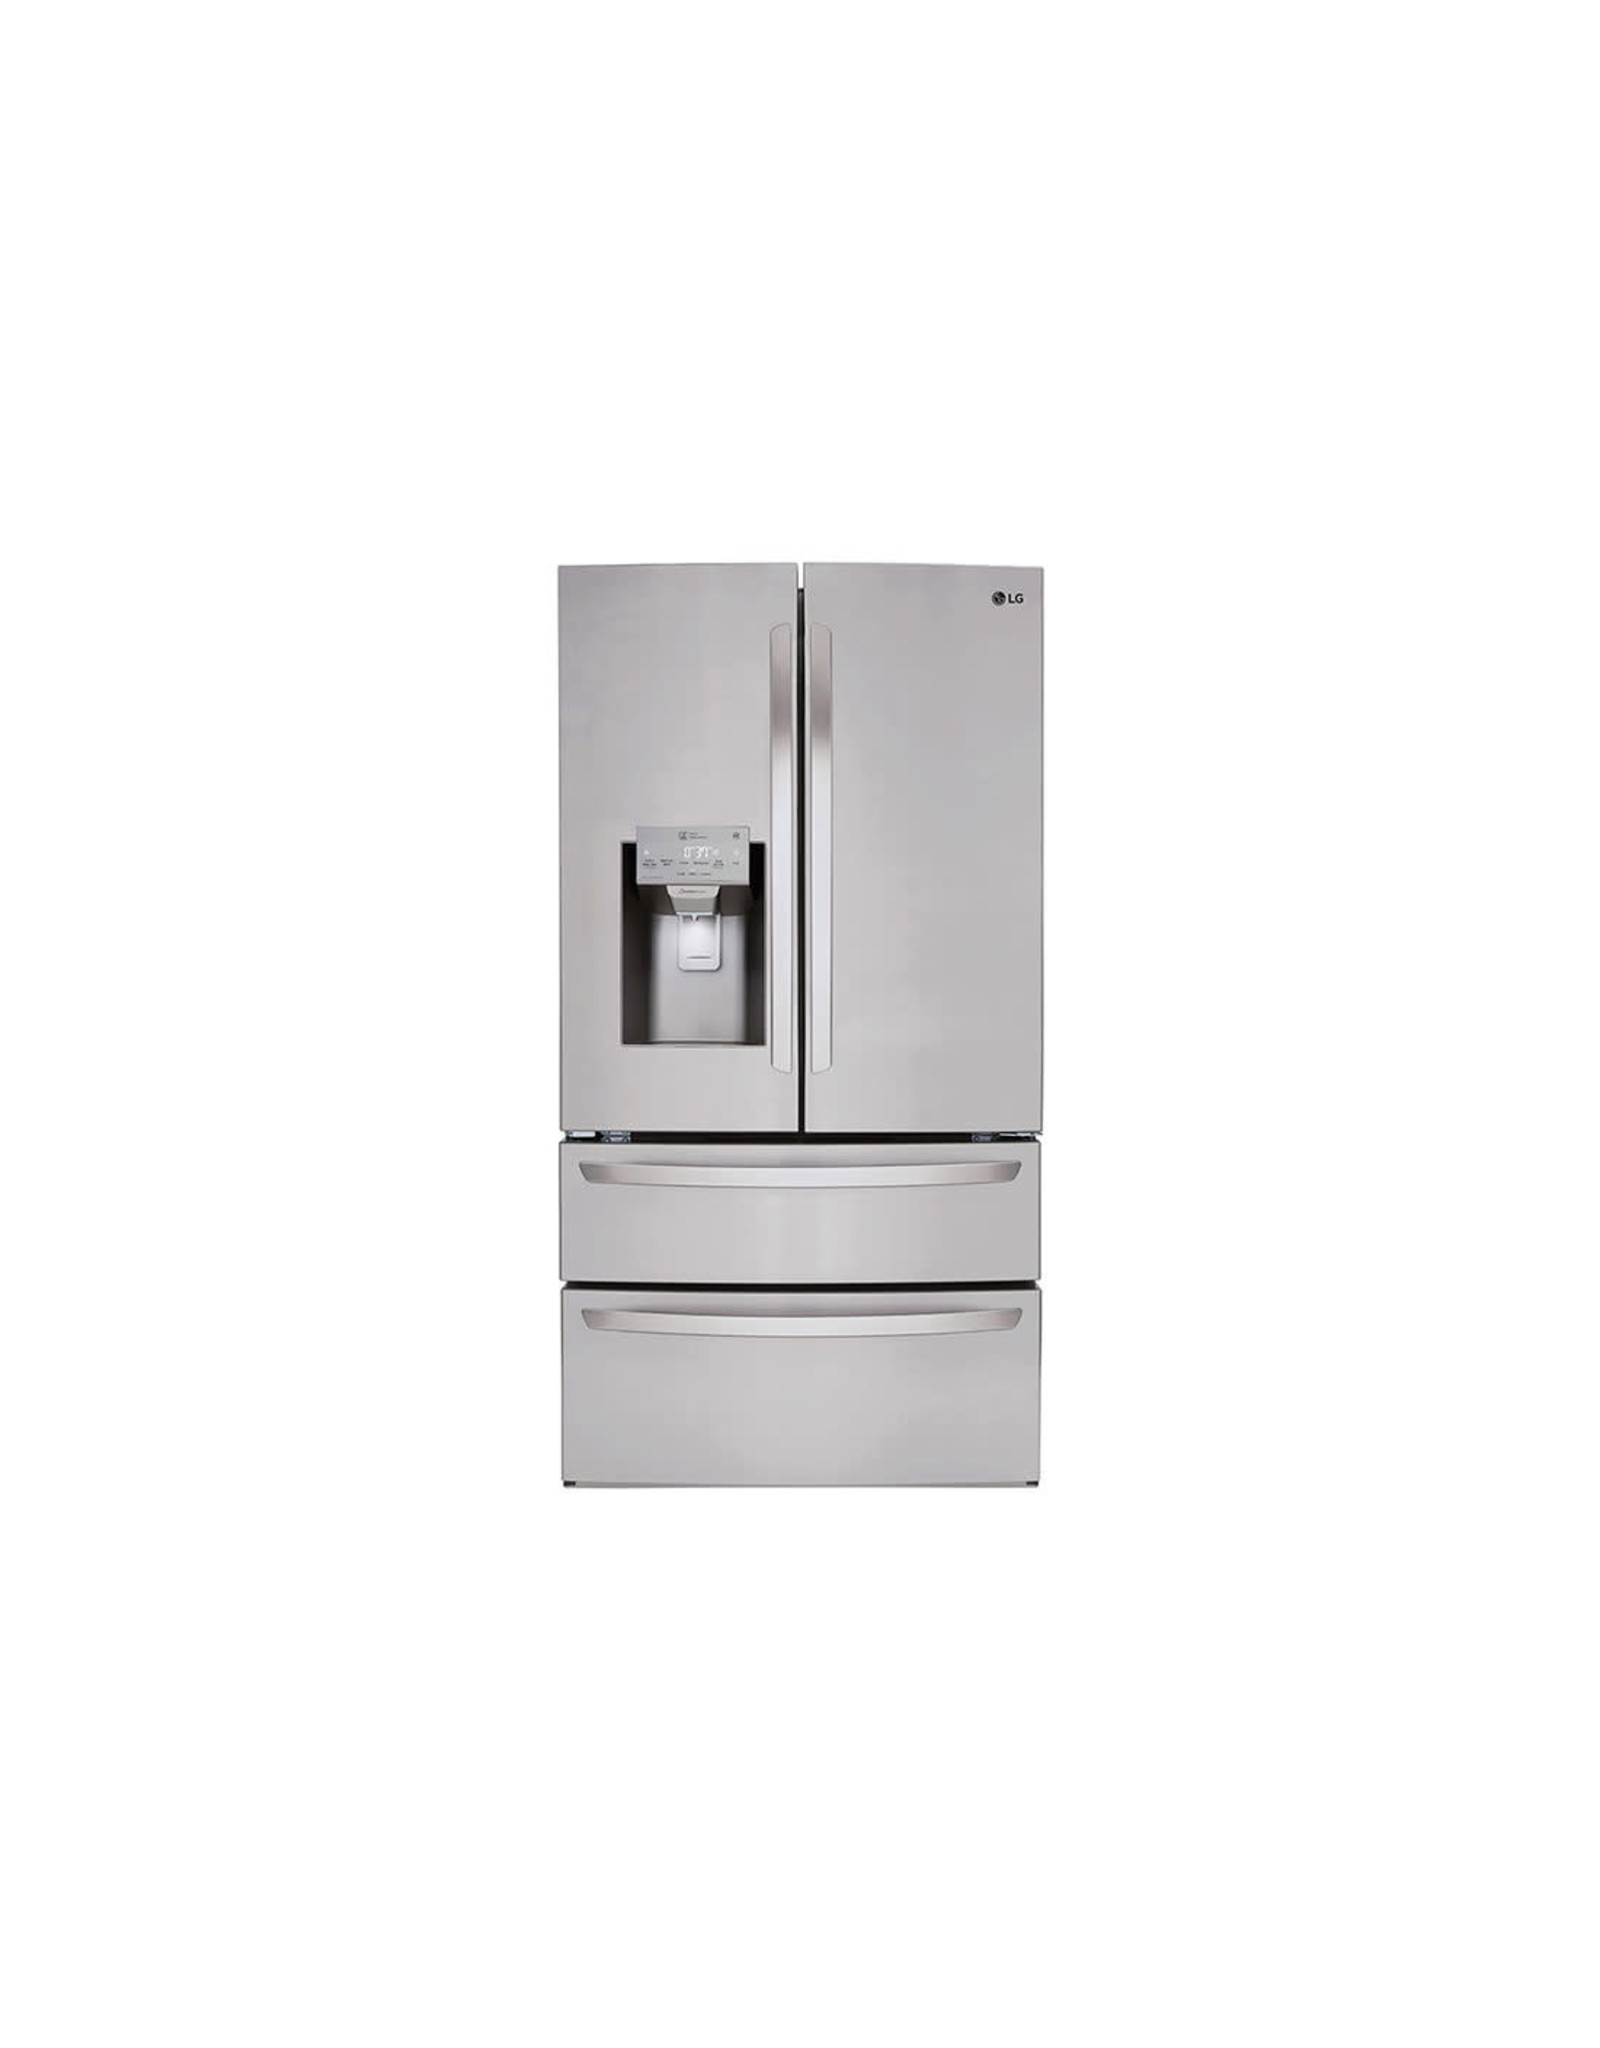 lg LMXS28626S  27.8 cu. ft. 4 Door French Door Smart Refrigerator with 2 Freezer Drawers and Wi-Fi Enabled in Stainless Steel